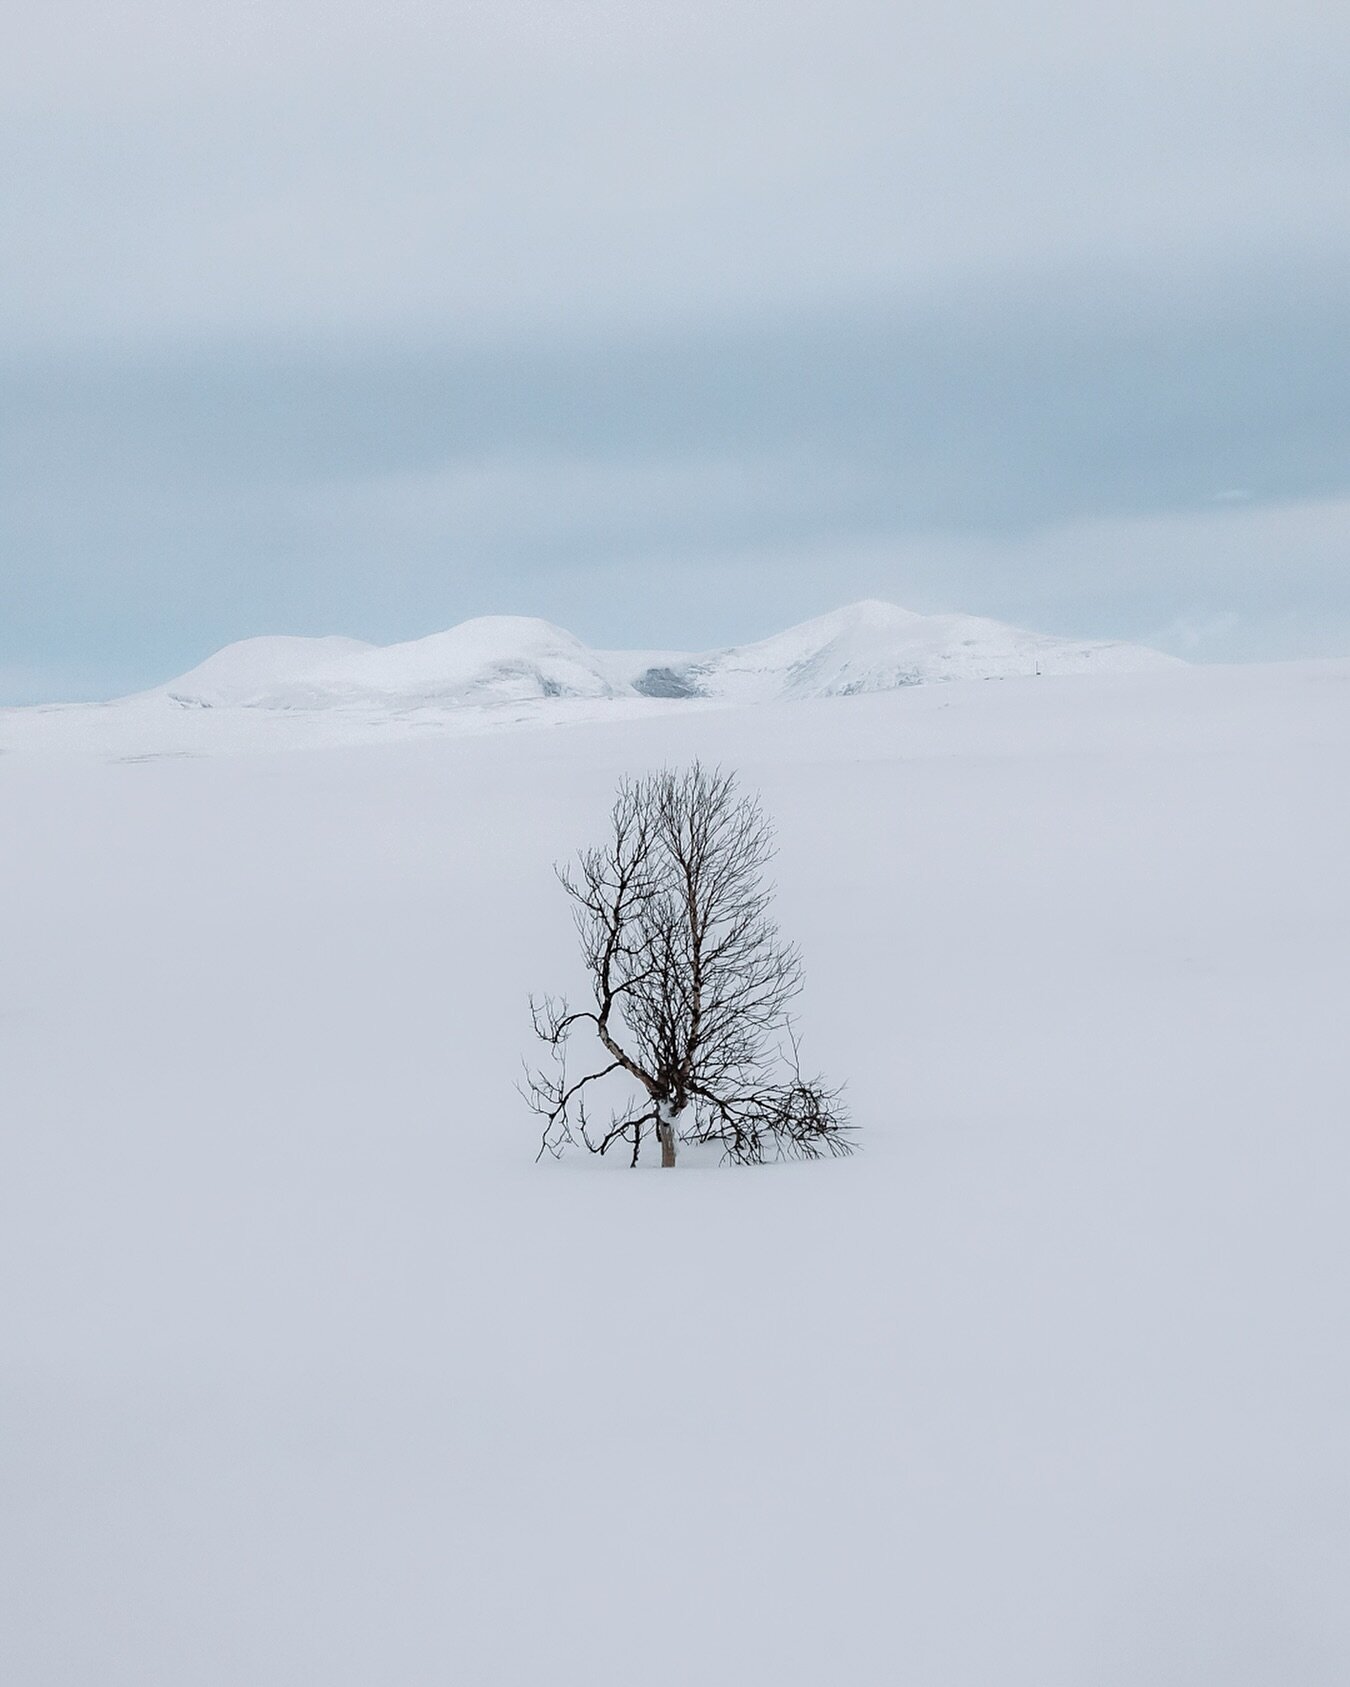 A lone mountain birch and the mighty Skarsfj&auml;llet mountains in the distance
.
.
#canonnordic #sweden
#tree #tree_brilliance #tree_magic #raw_alltrees #your_trees_ #tree_shotz #tree_captures #moodylandscapes  #moodyscenery #moodynature #natures_m